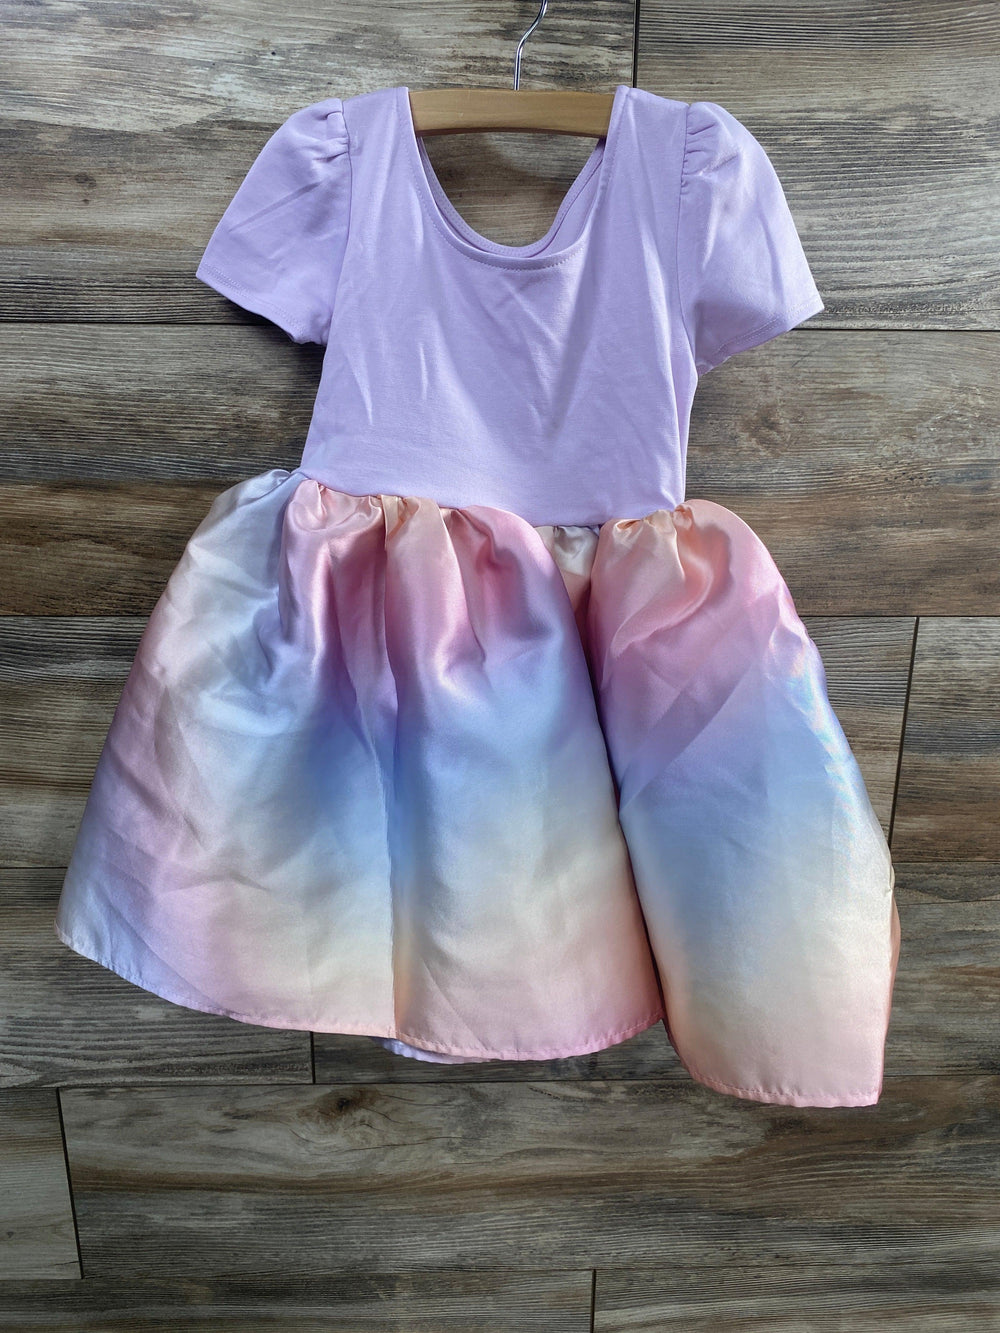 H&M Purple Flared Skirt Dress sz 3-4T - Me 'n Mommy To Be